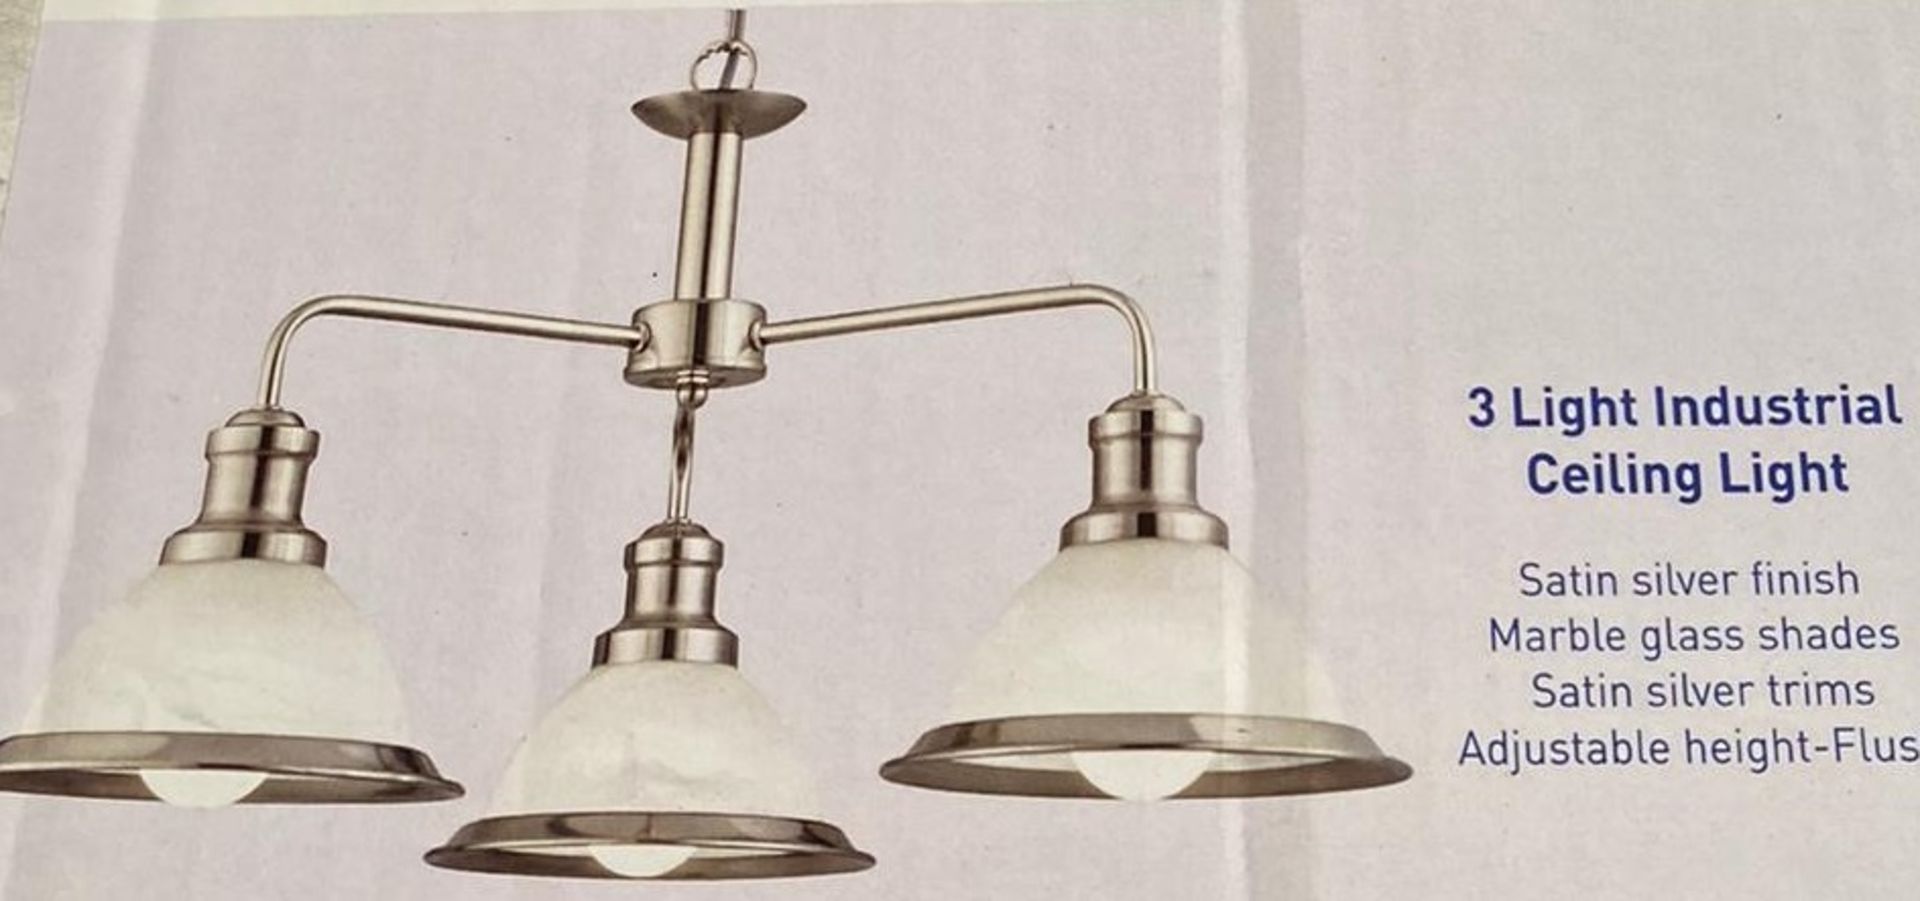 1 x Searchlight Industrial Ceiling Light in satin silver - Ref: 1593-3SS - New and Boxed - RRP: £10